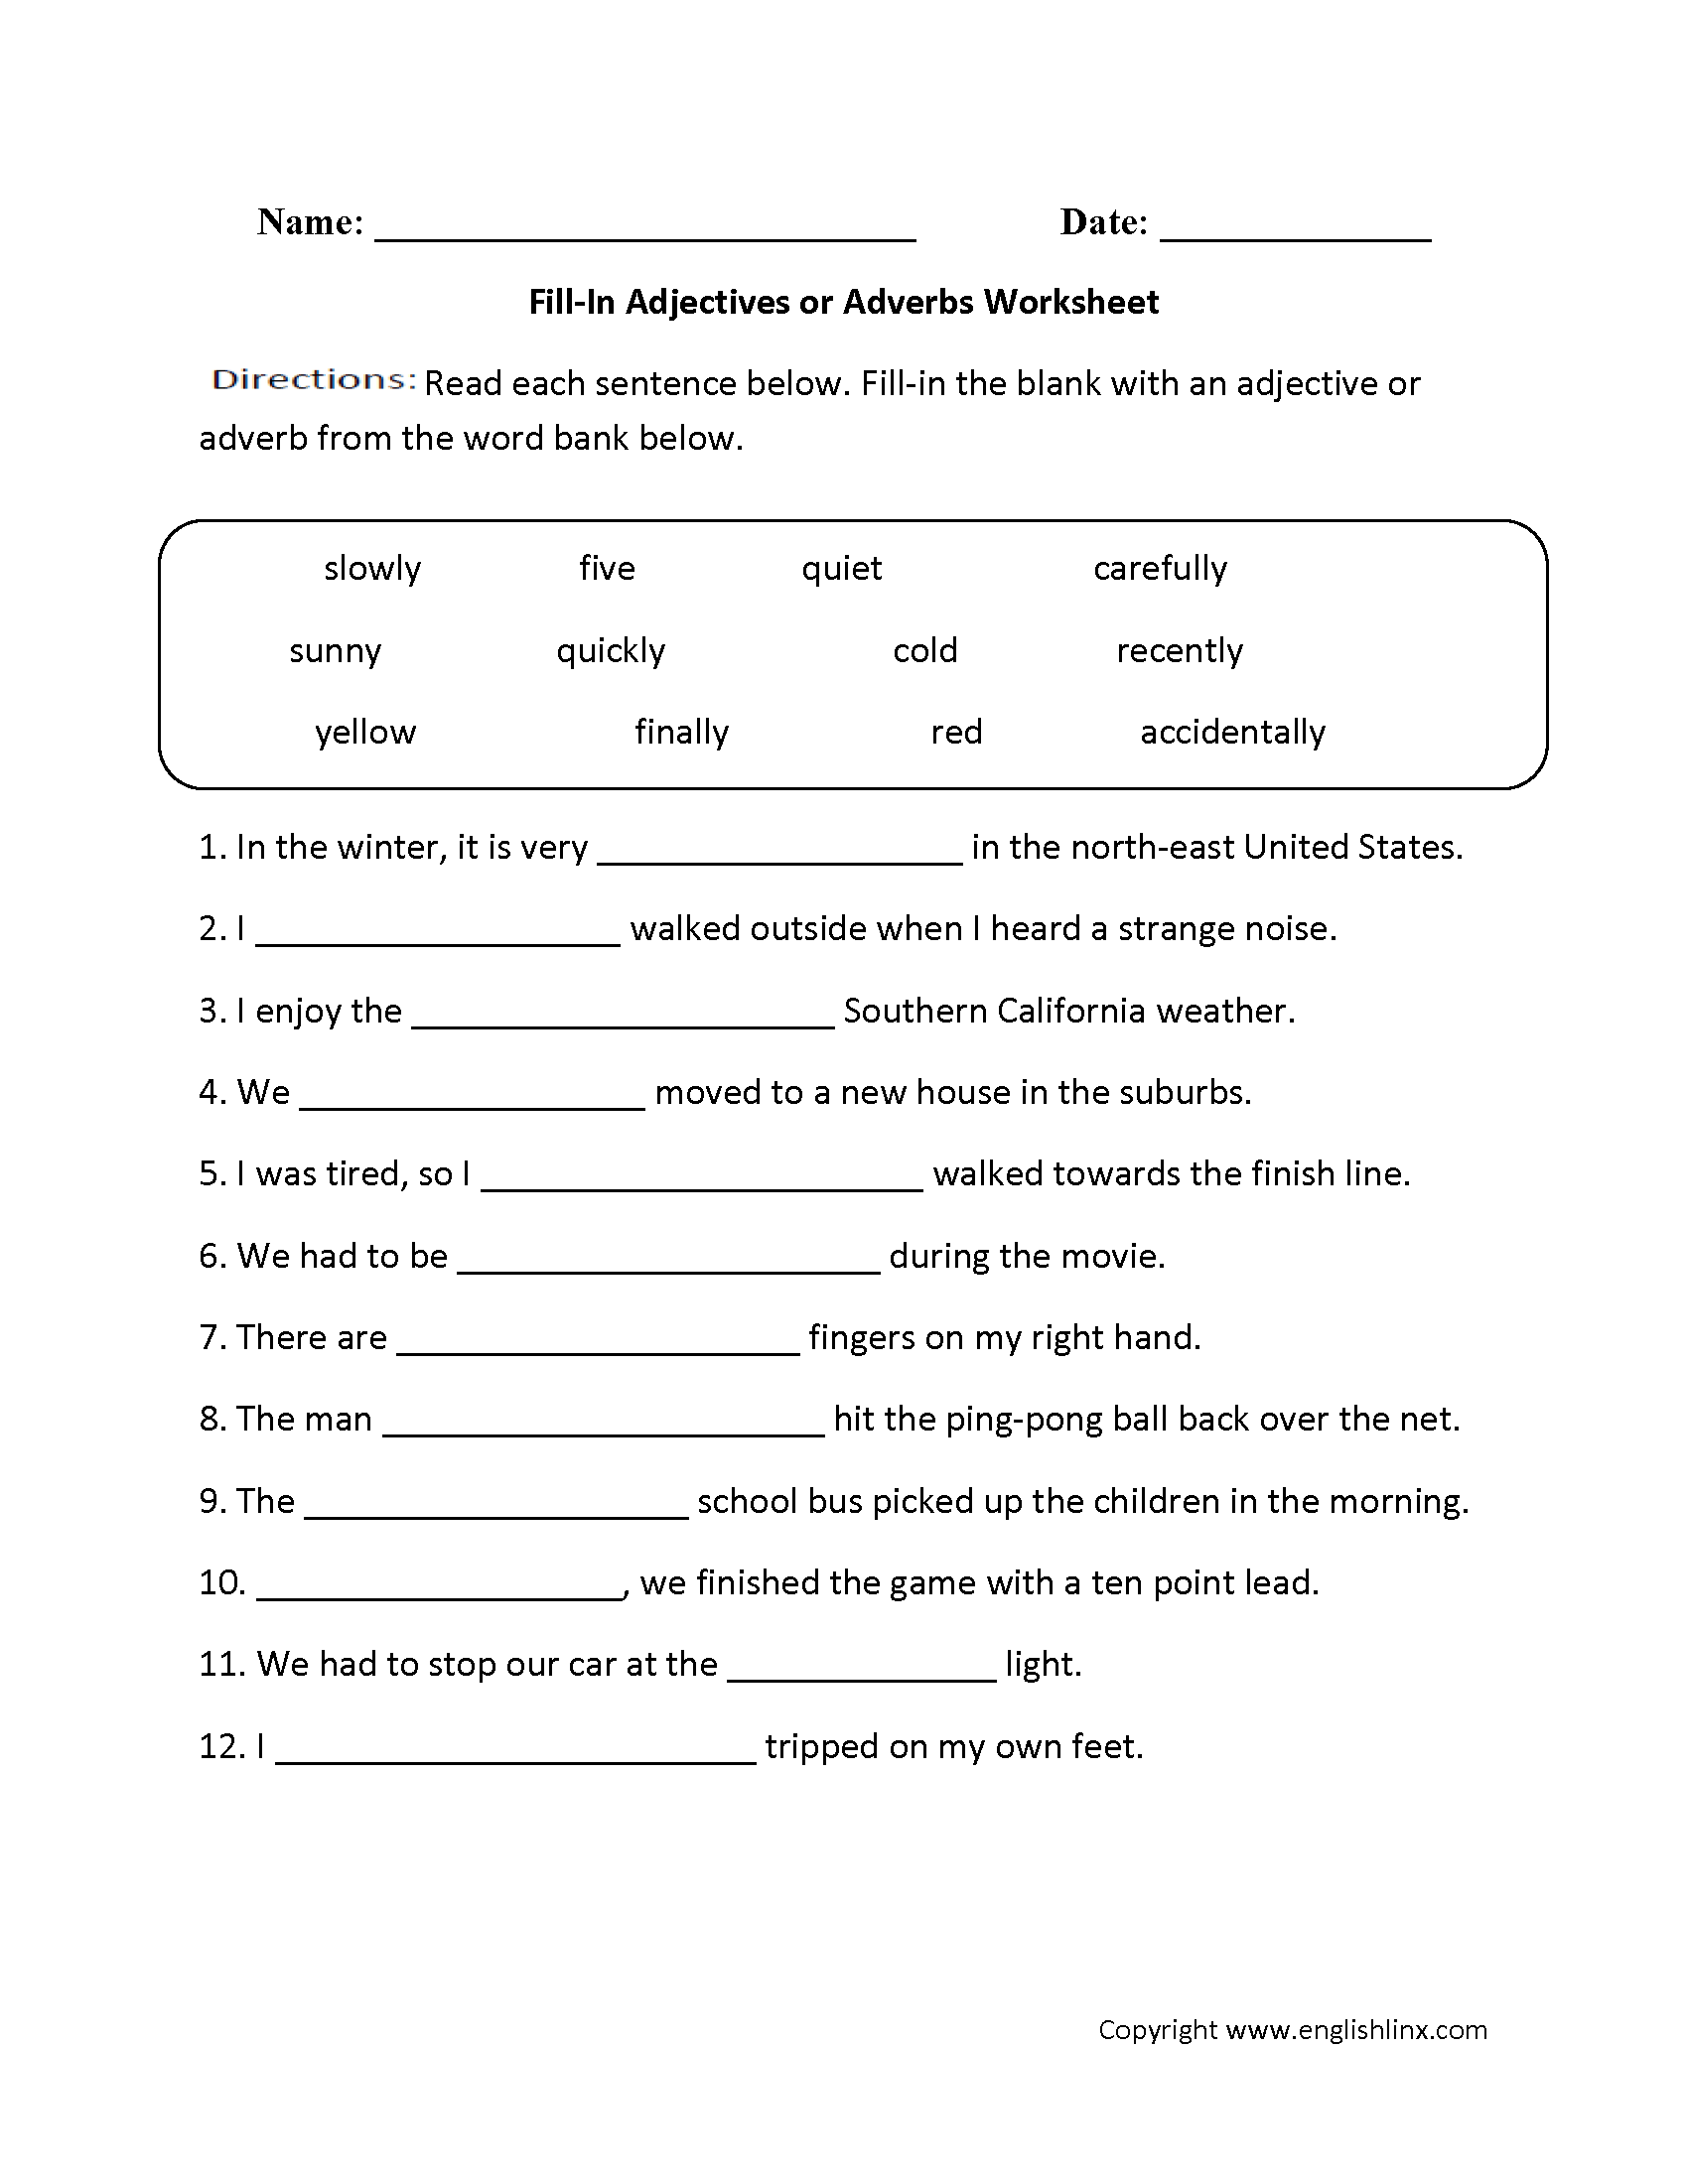 Adjectives And Adverbs Worksheet The Best Worksheets Image